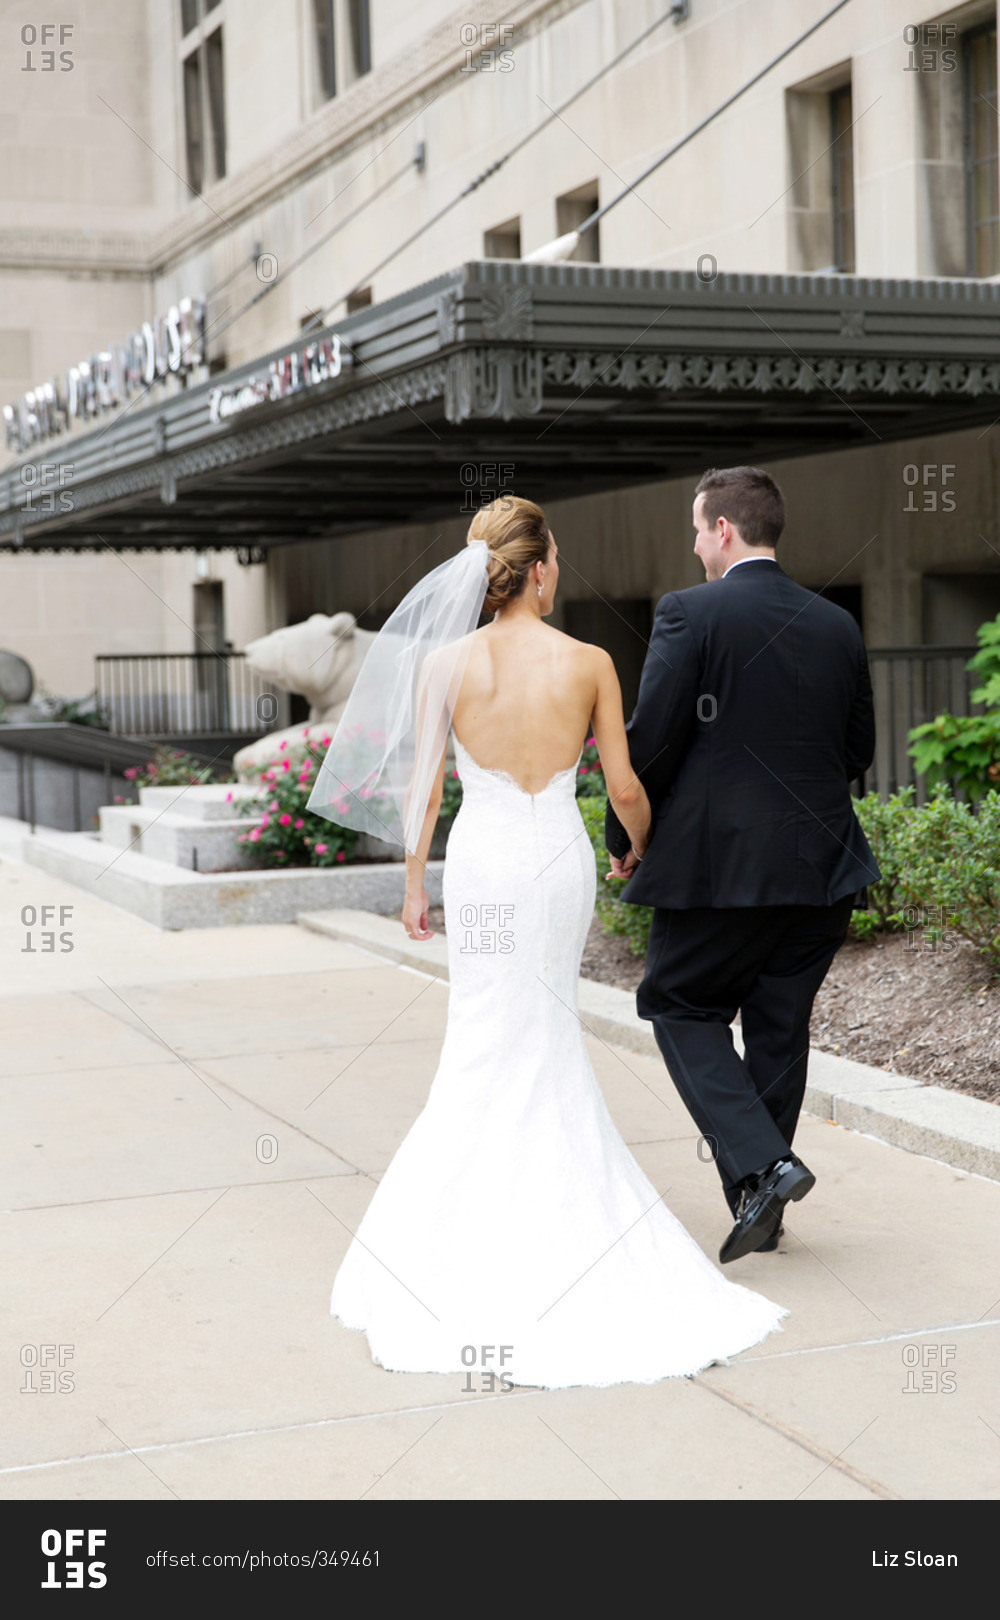 Newlyweds holding hands and walking toward the entrance of an elegant building